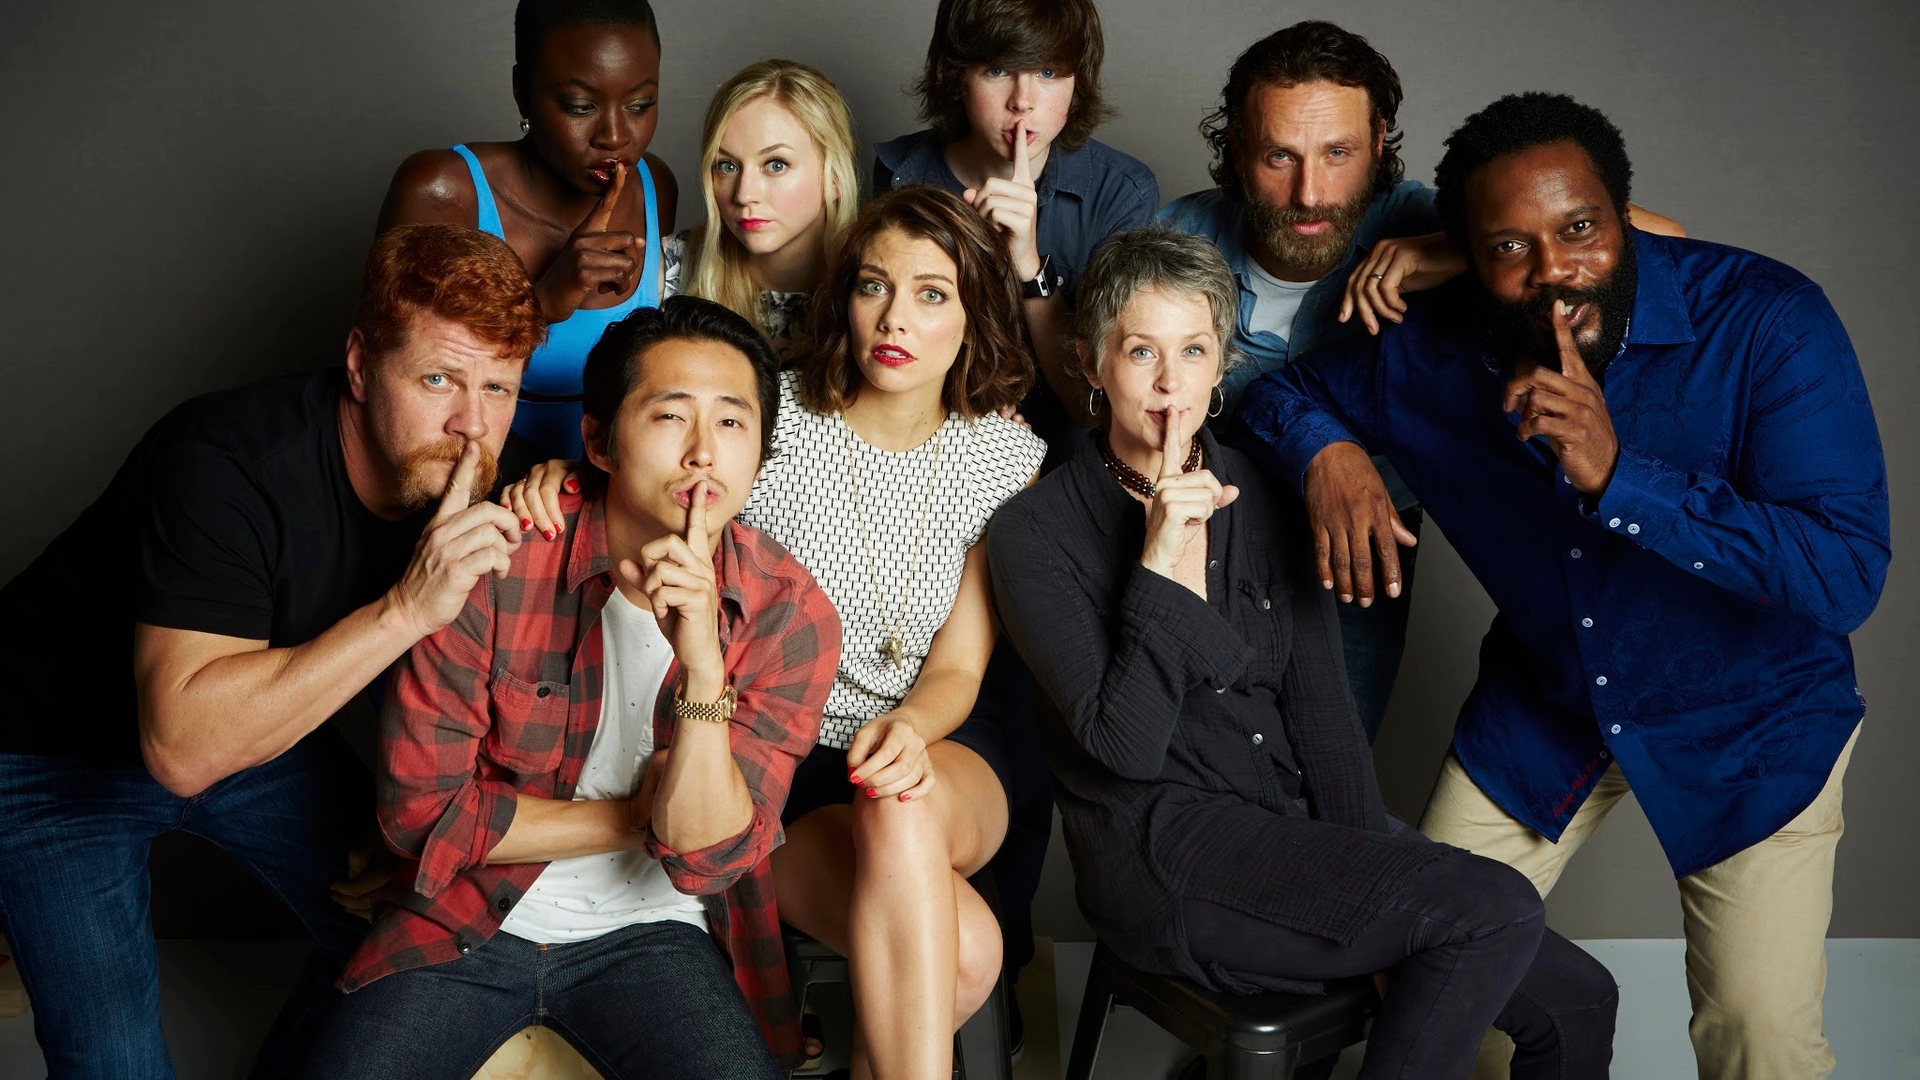 The Walking Dead Actors for 1920 x 1080 HDTV 1080p resolution